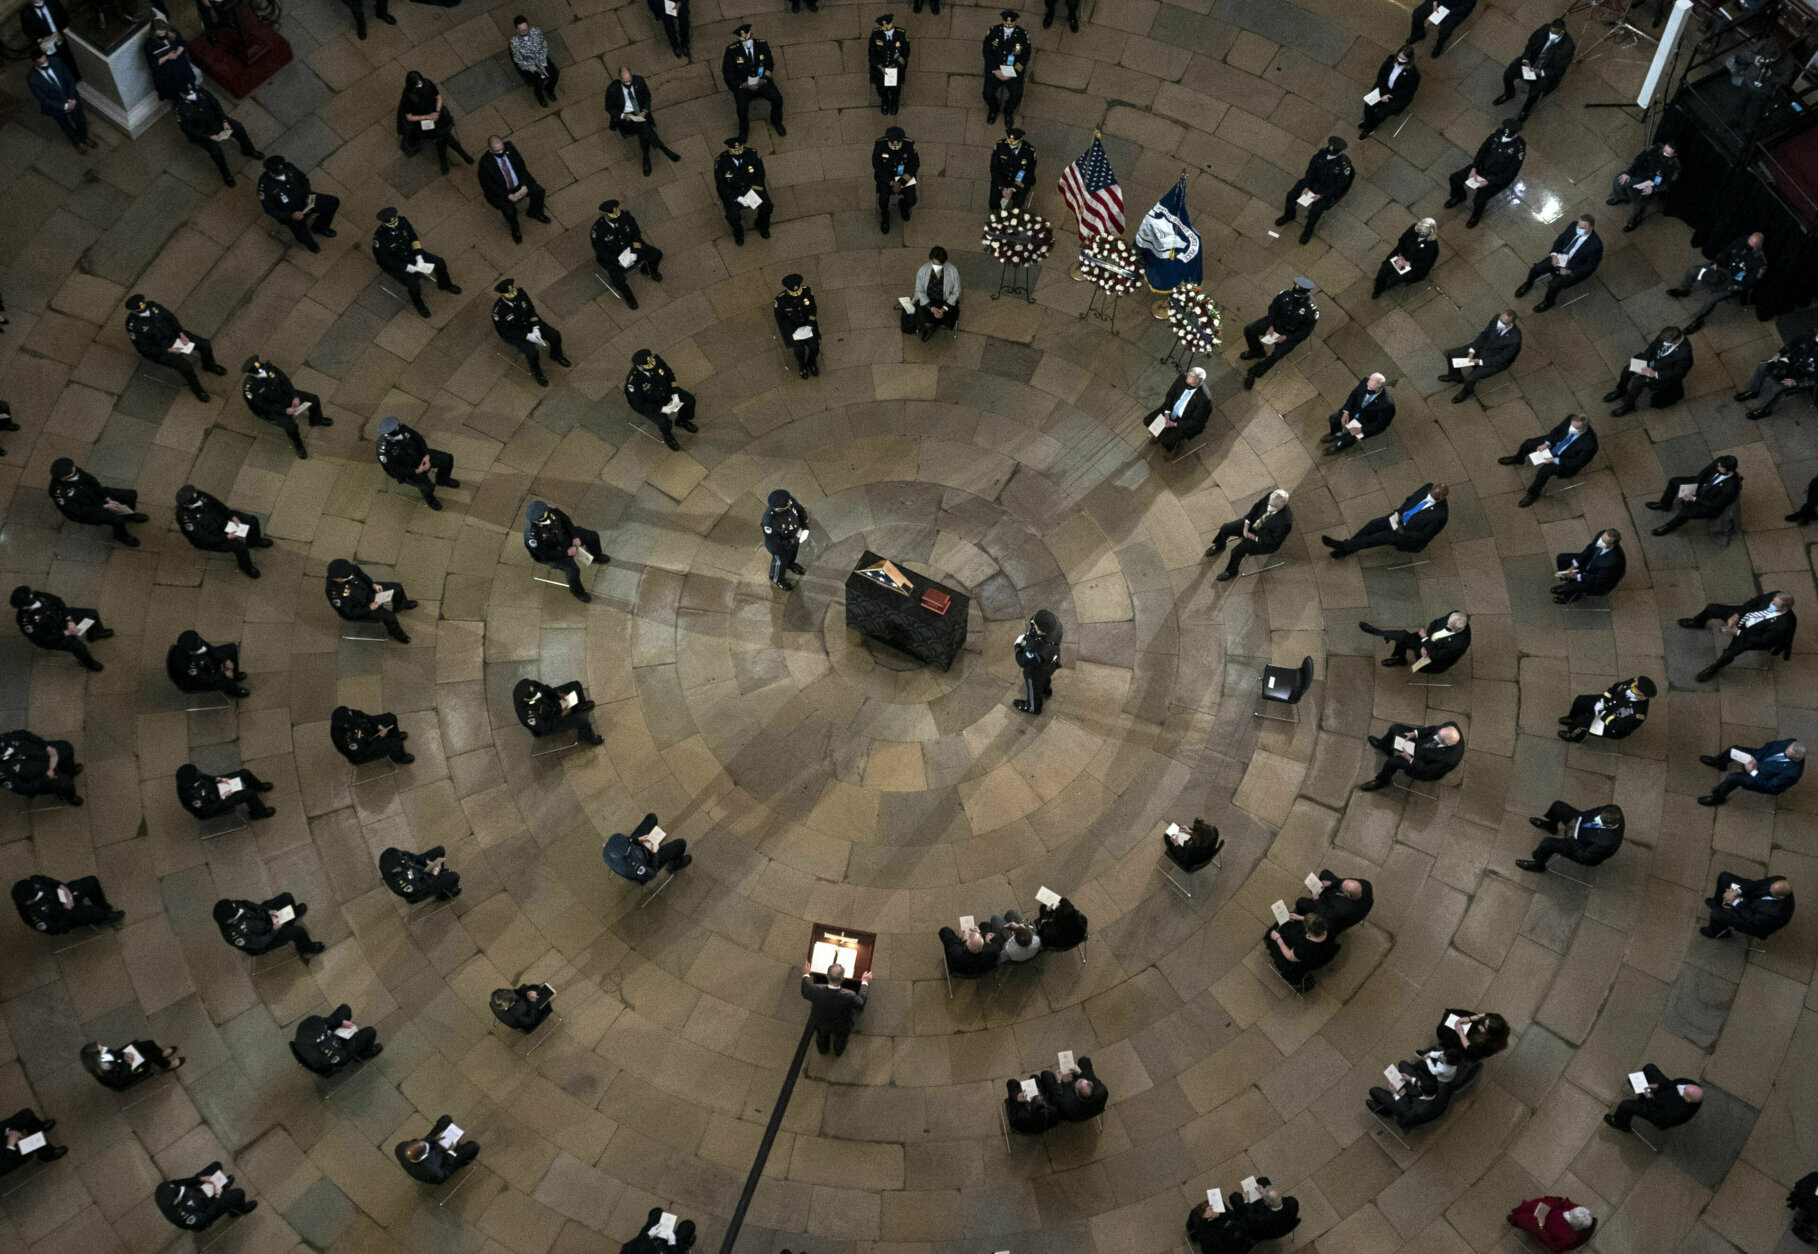 Senate Majority Leader Chuck Schumer of N.Y., speaks during a ceremony memorializing U.S. Capitol Police officer Brian Sicknick, as an urn with his cremated remains lies in honor on a black-draped table at the center of the Capitol Rotunda, Wednesday, Feb. 3, 2021, in Washington. (Kevin Dietsch/Pool via AP)